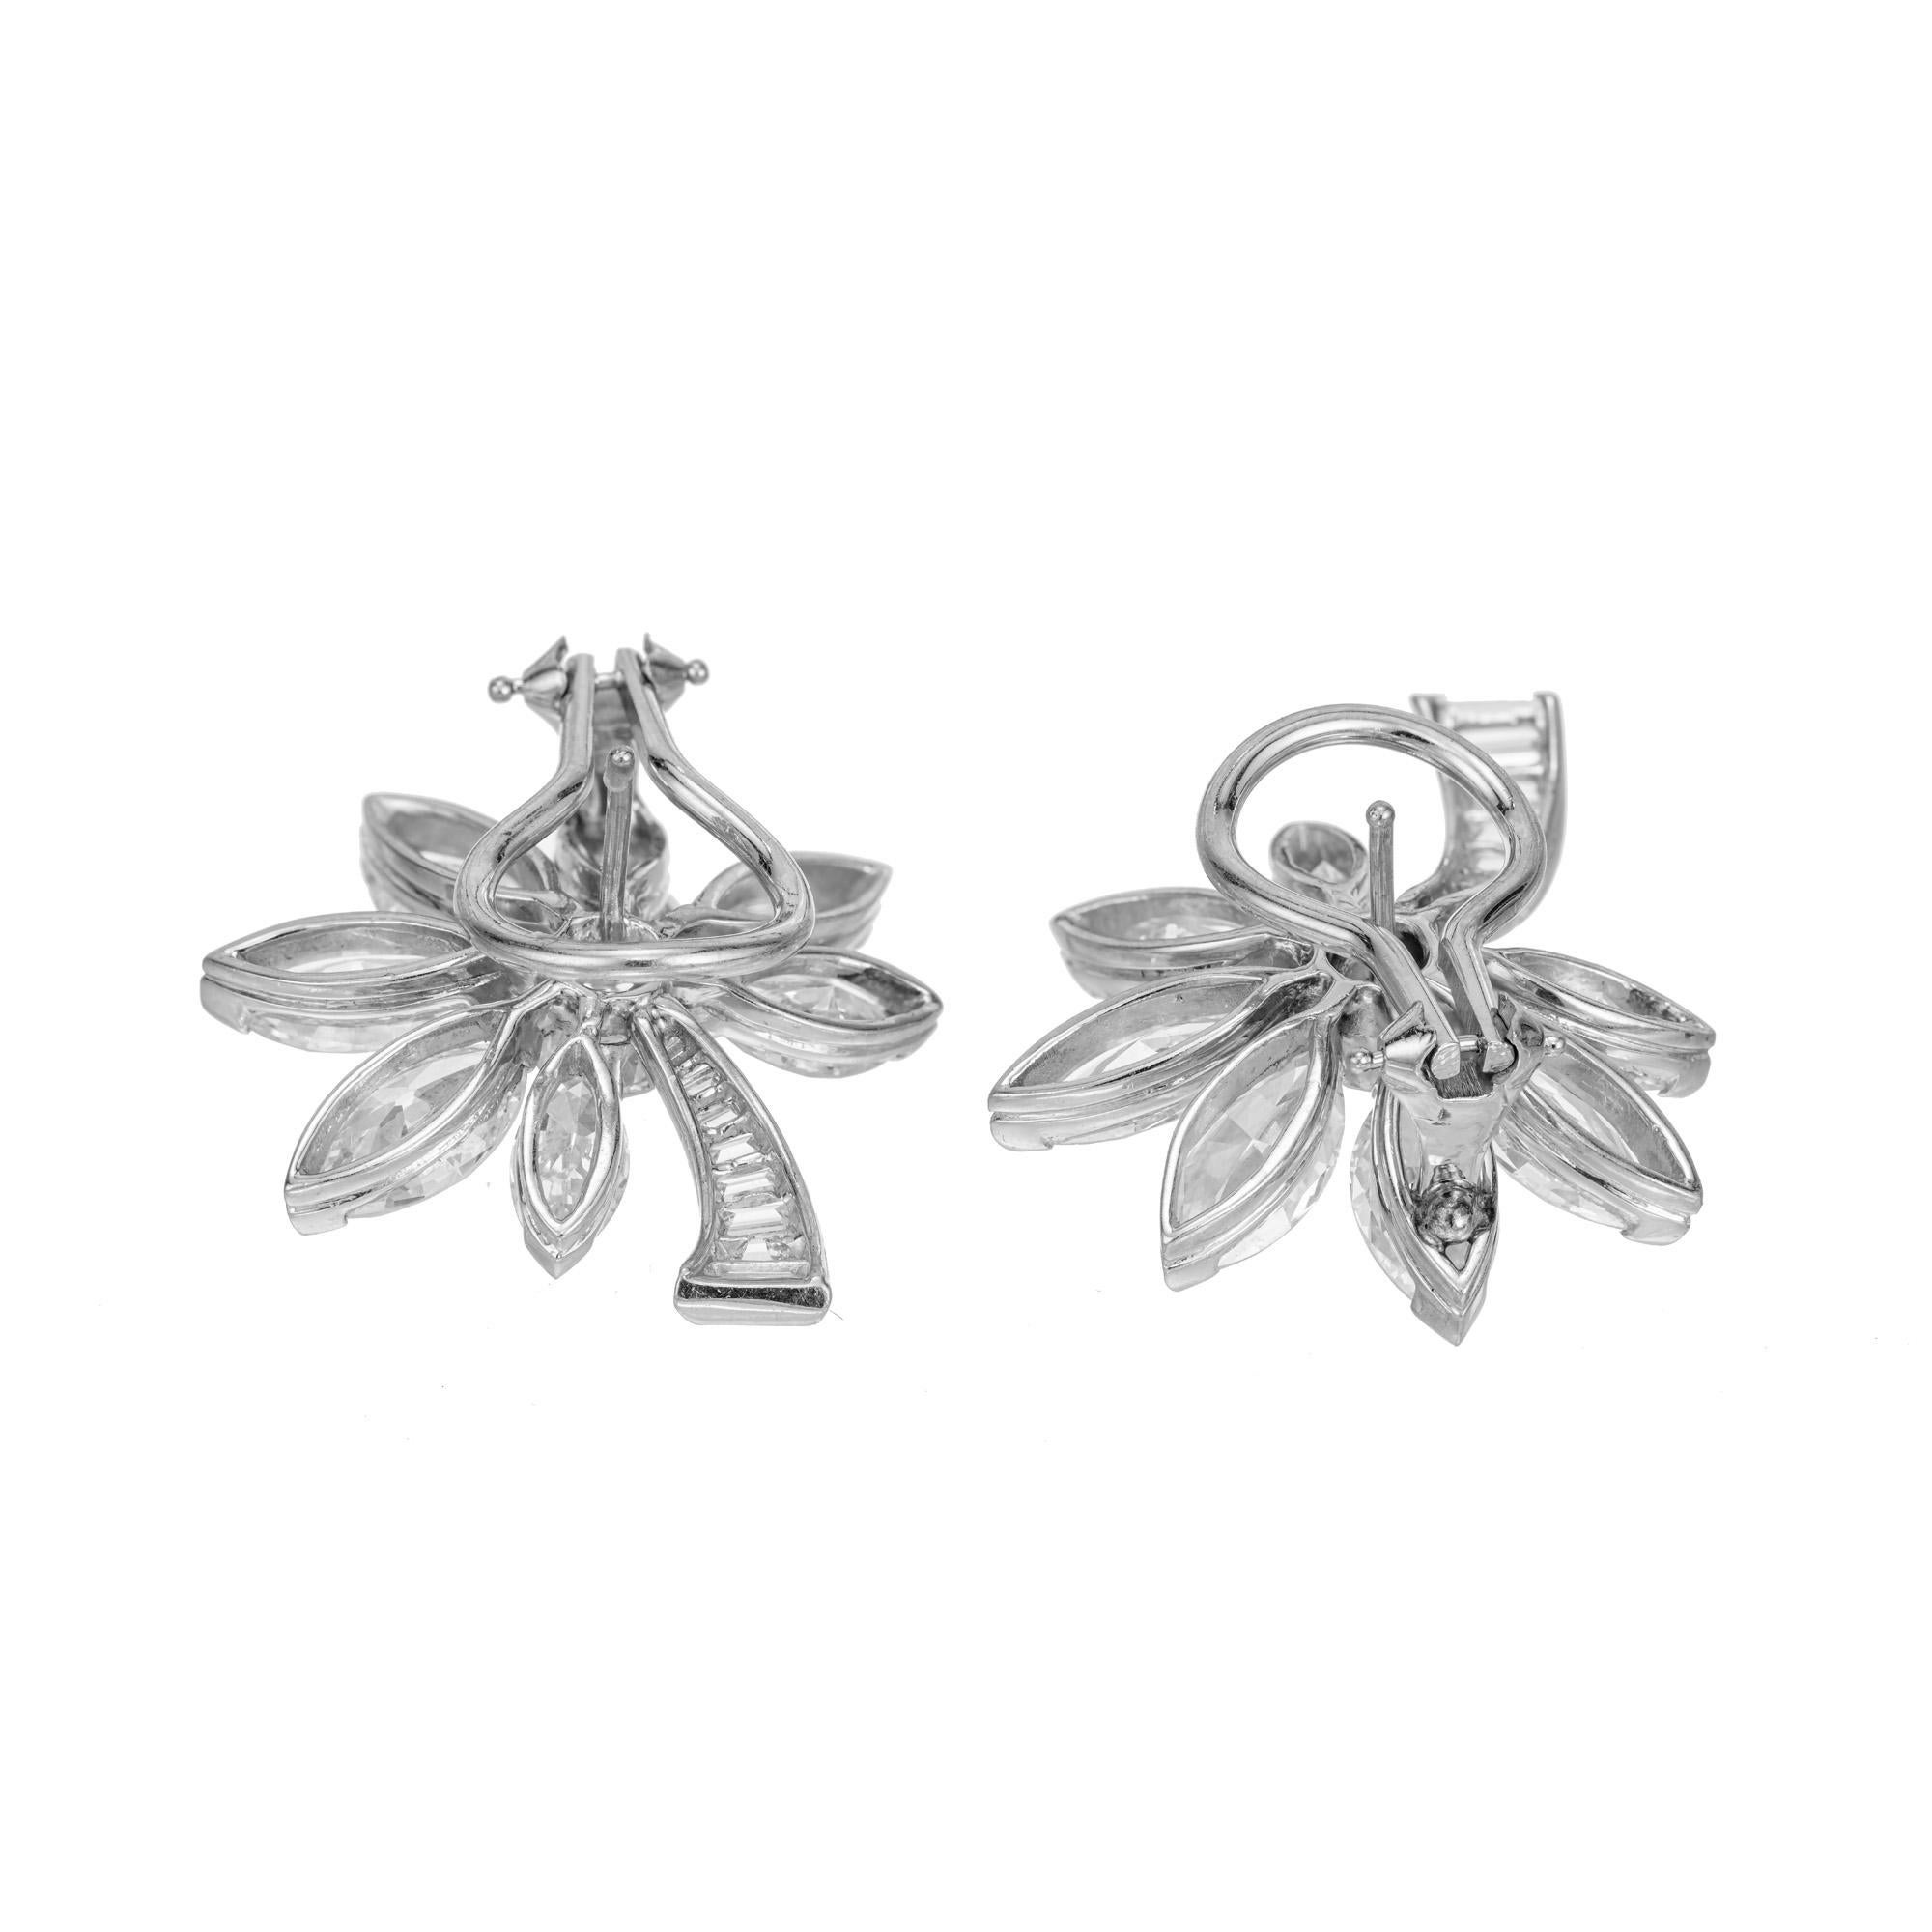 8.91 Carat Diamond Platinum Flower Clip Post Earrings In Good Condition For Sale In Stamford, CT